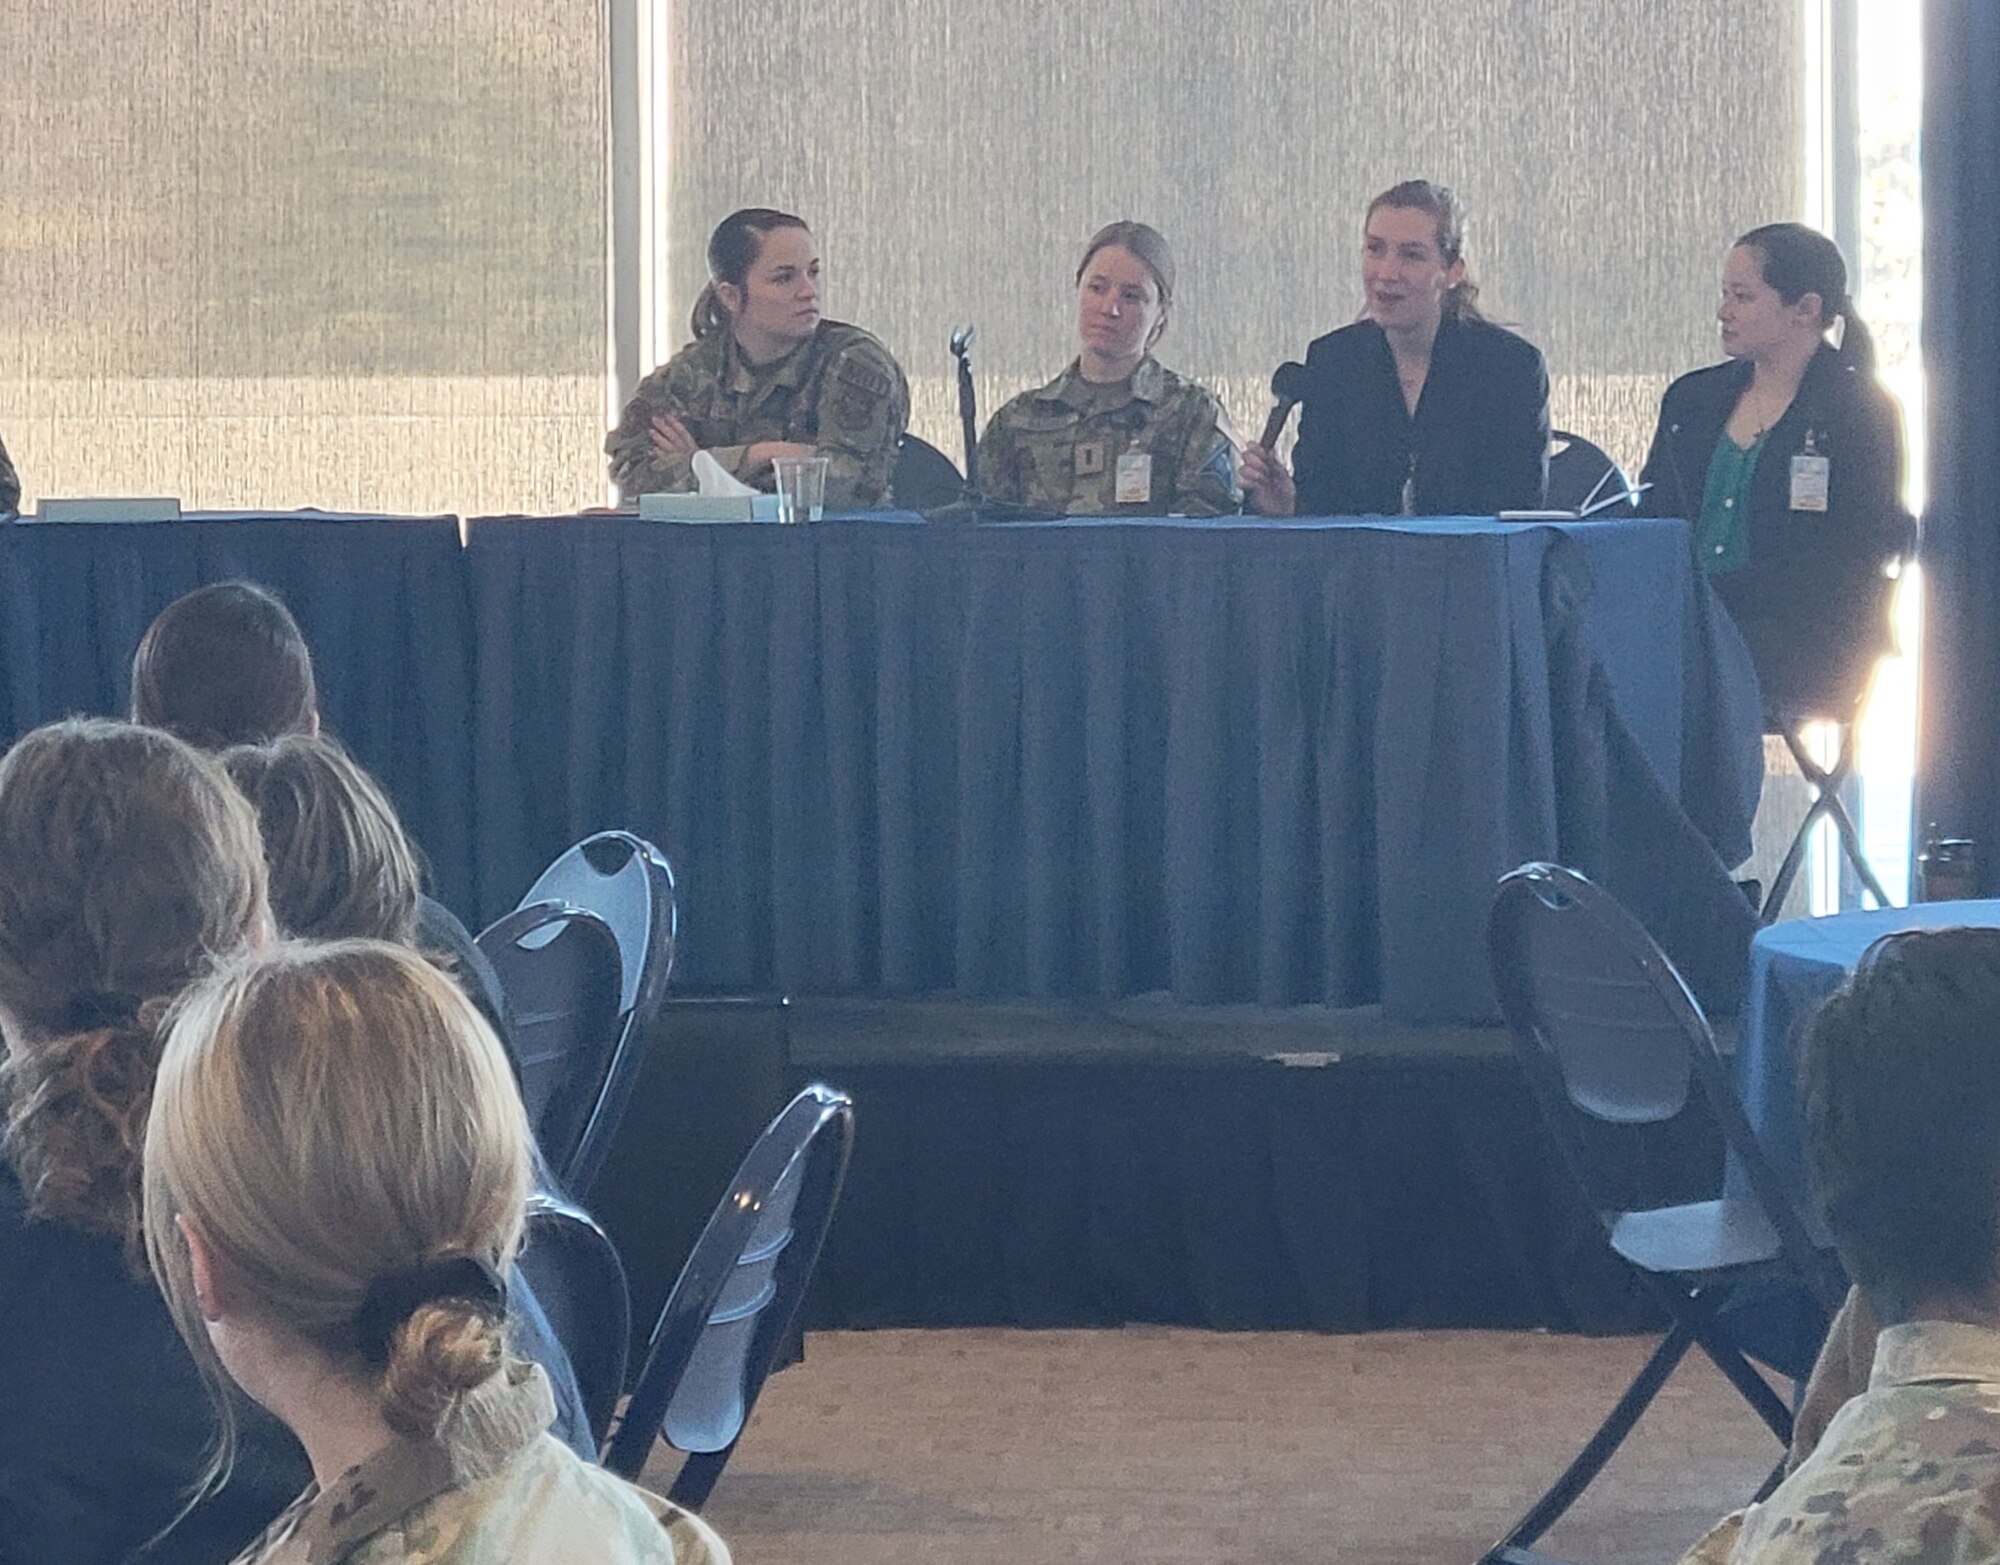 Special Agent Helen Landwehr, OSI Detachment 402, second from right, speaks to attendees as a member of the recent graduates panel at the 4th Annual Jean Bartik Computer Symposium hosted by the U.S. Air Force Academy, Colo., Feb. 2. (Photo by SA Gage Davis, OSI Det. 439)